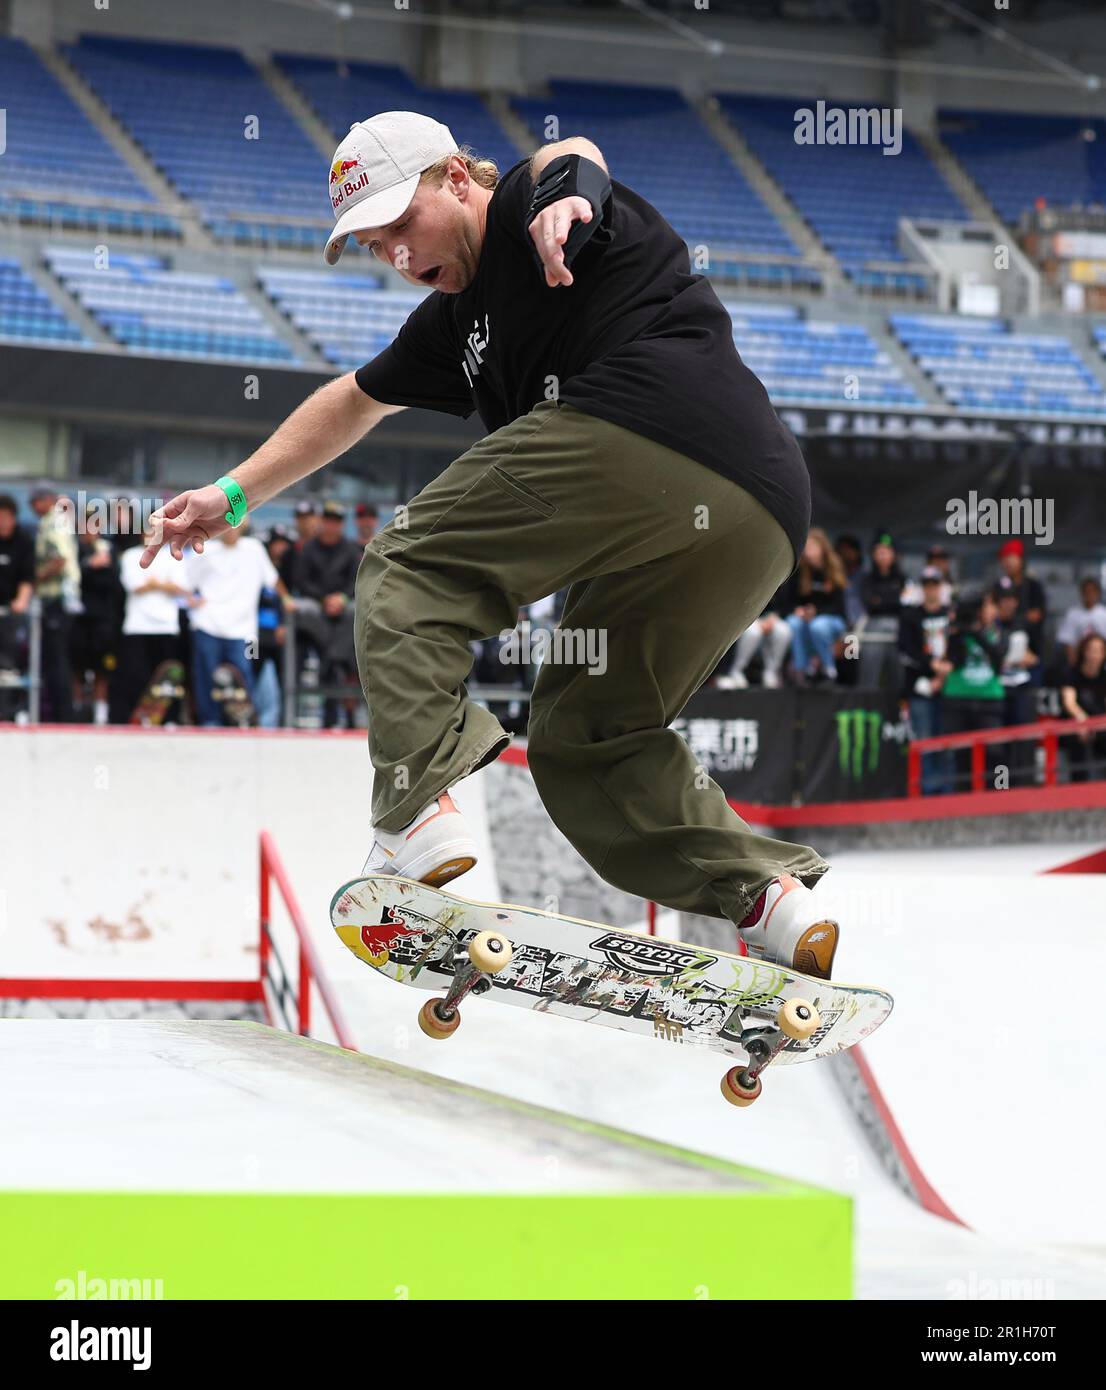 Jamie Foy of the U.S.A.performs during the men's Skateboarding